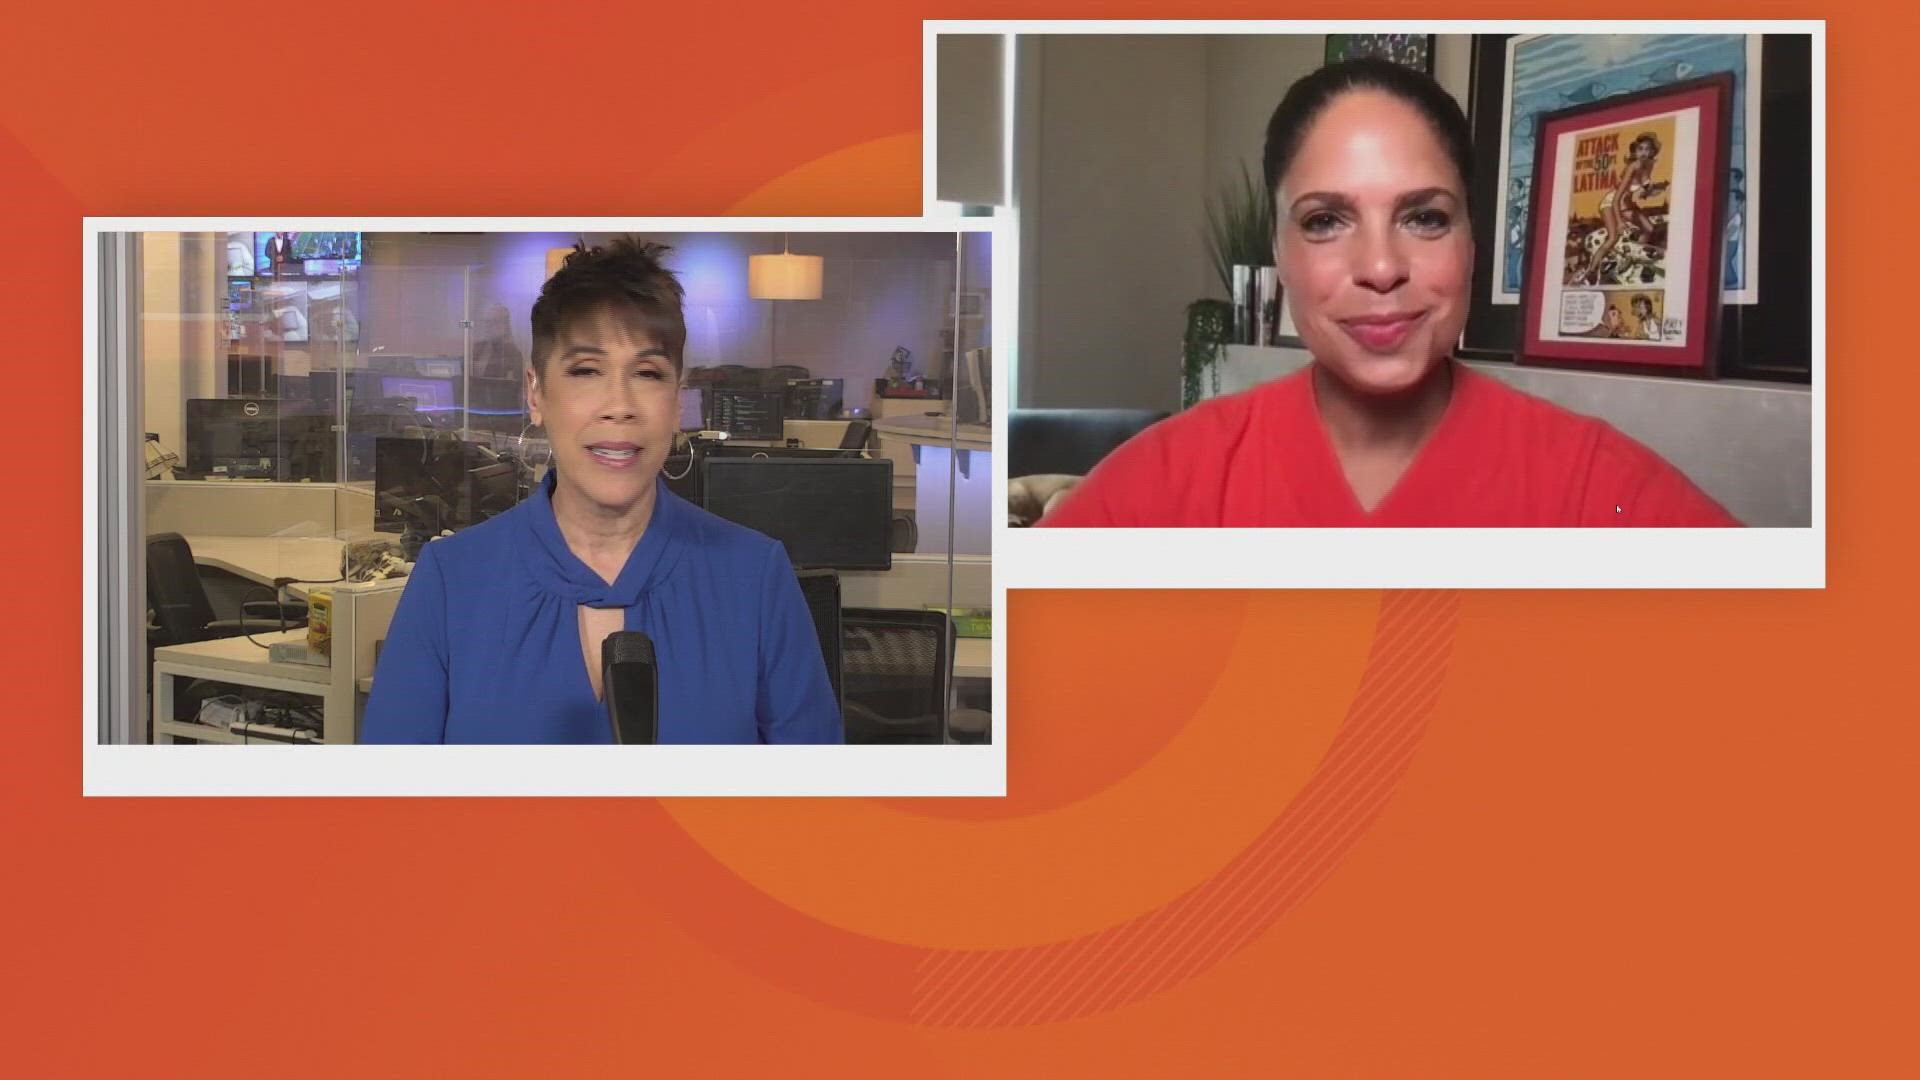 KGW Sunrise's Brenda Braxton spoke with Soledad O'Brien about a wide-range of topics including being a parent and balancing her career and family.